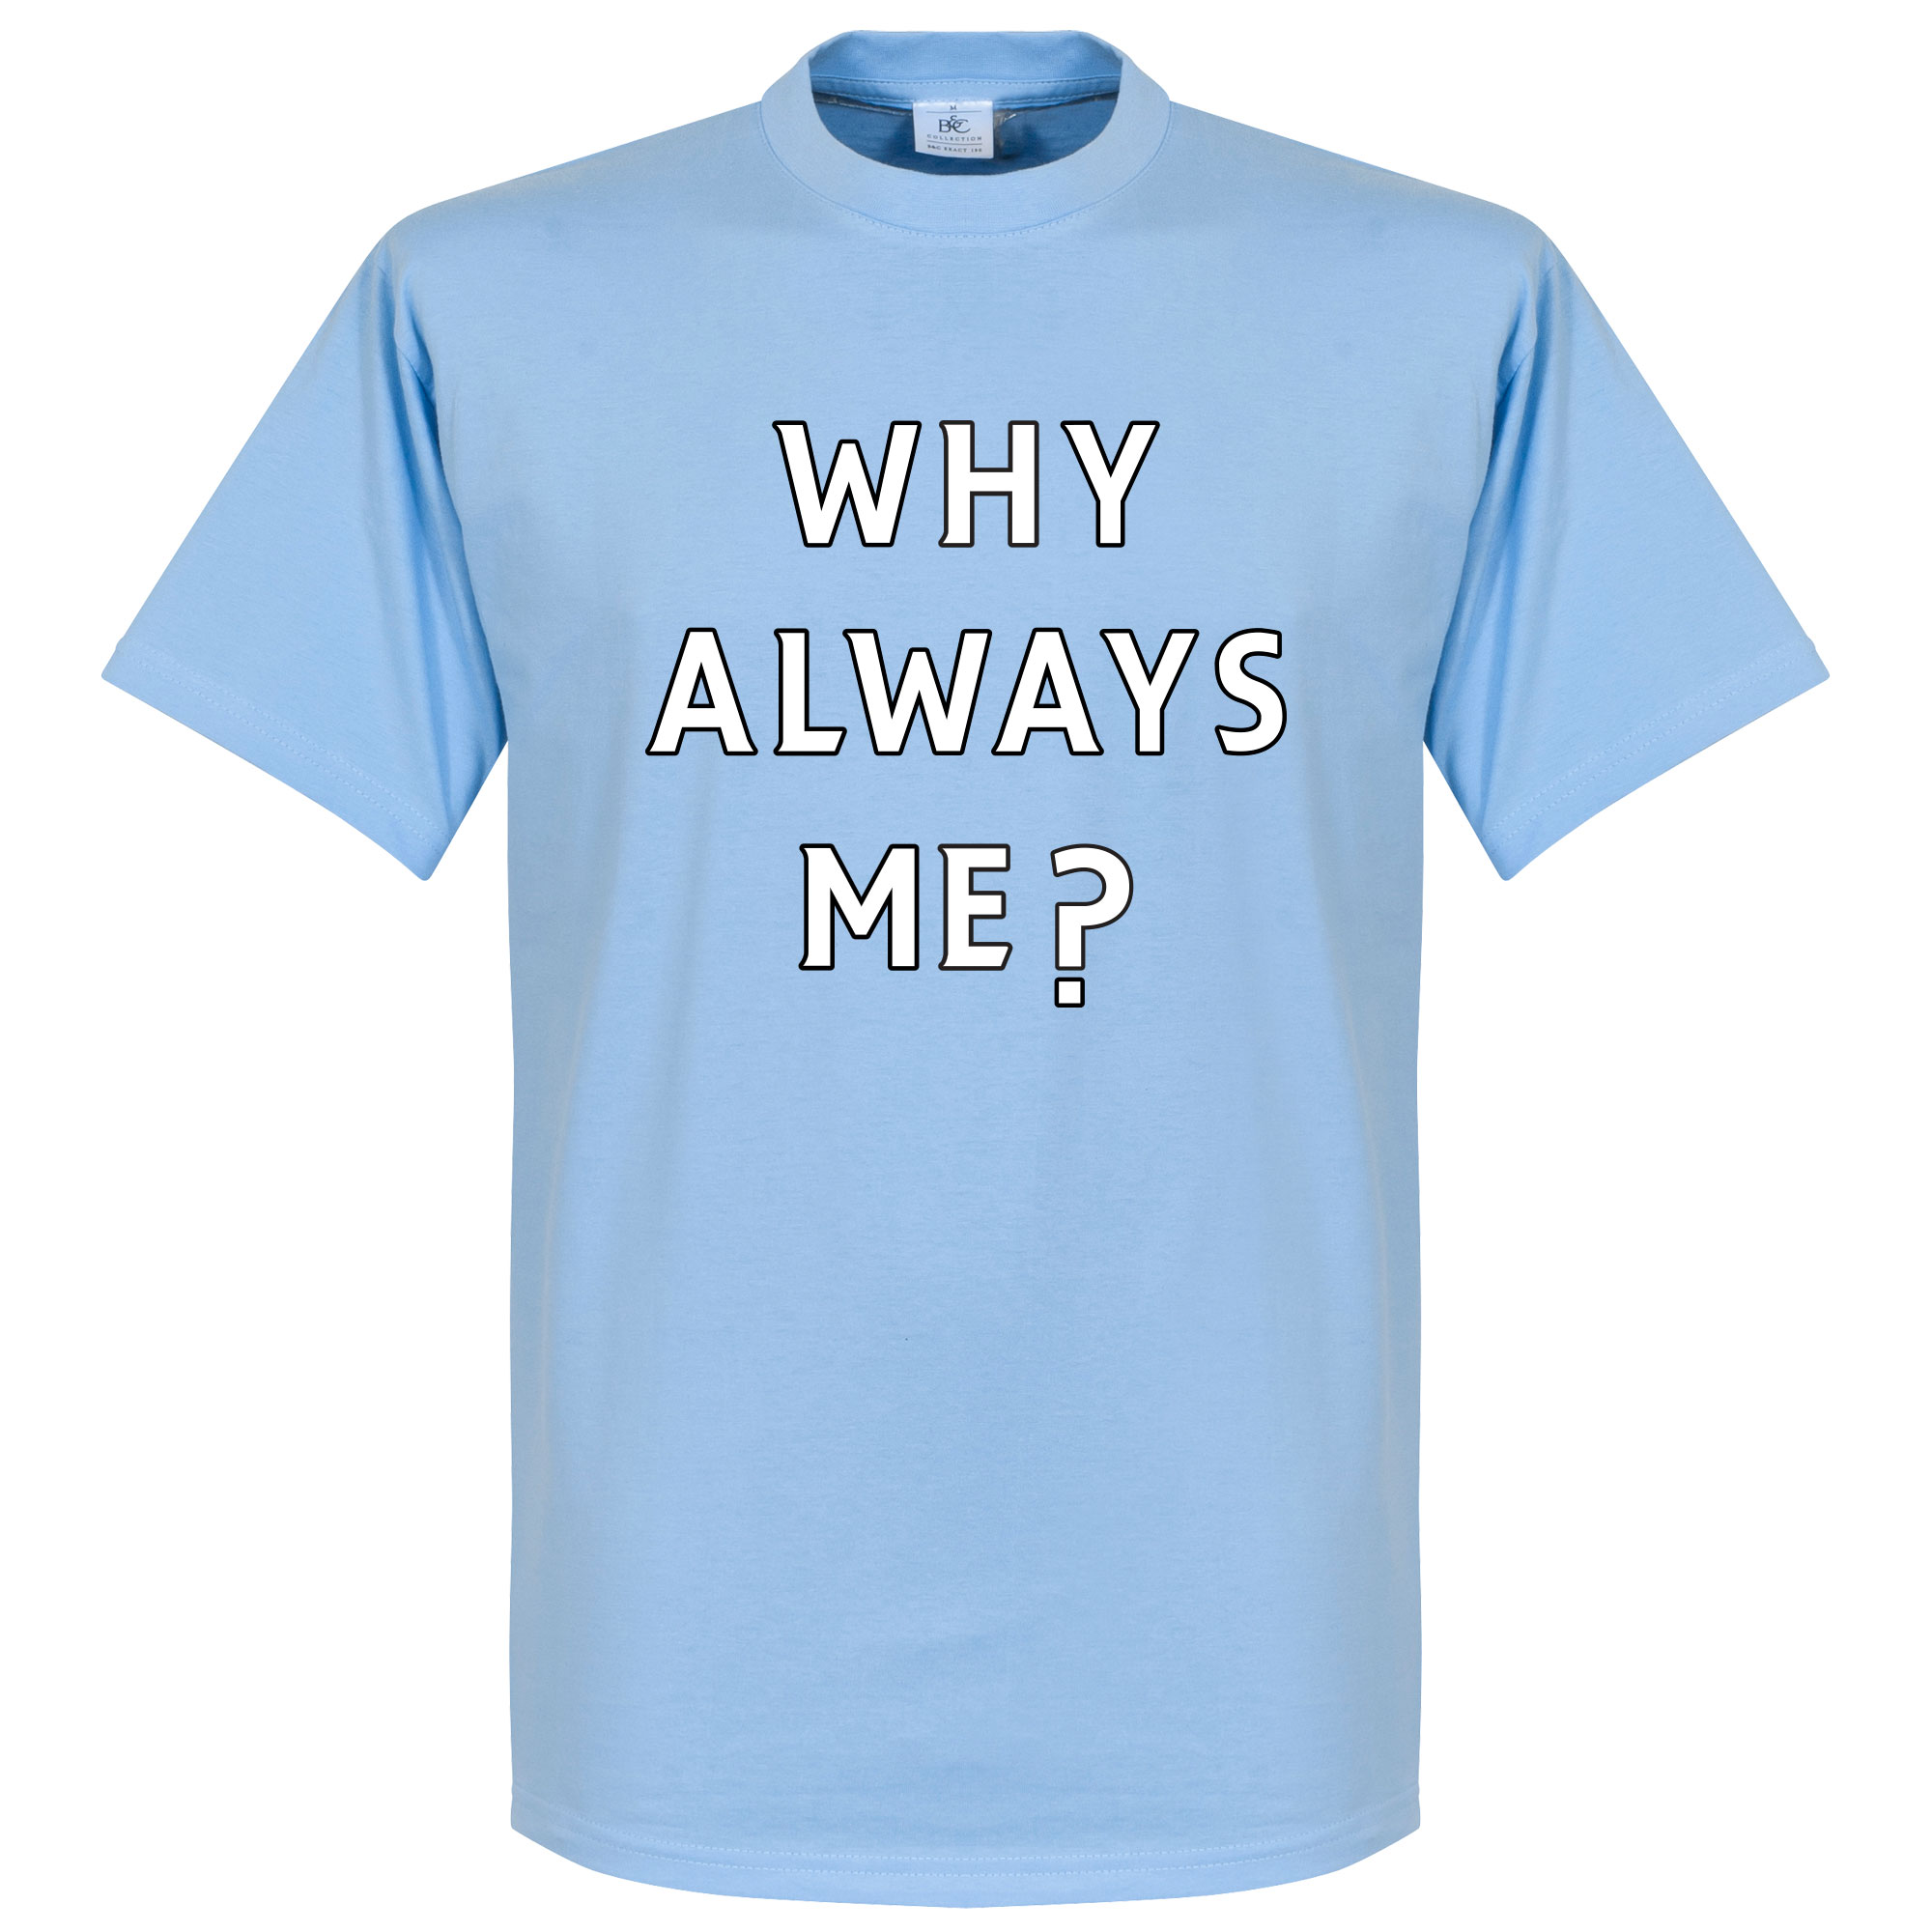 Why Always Me? T-Shirt XS